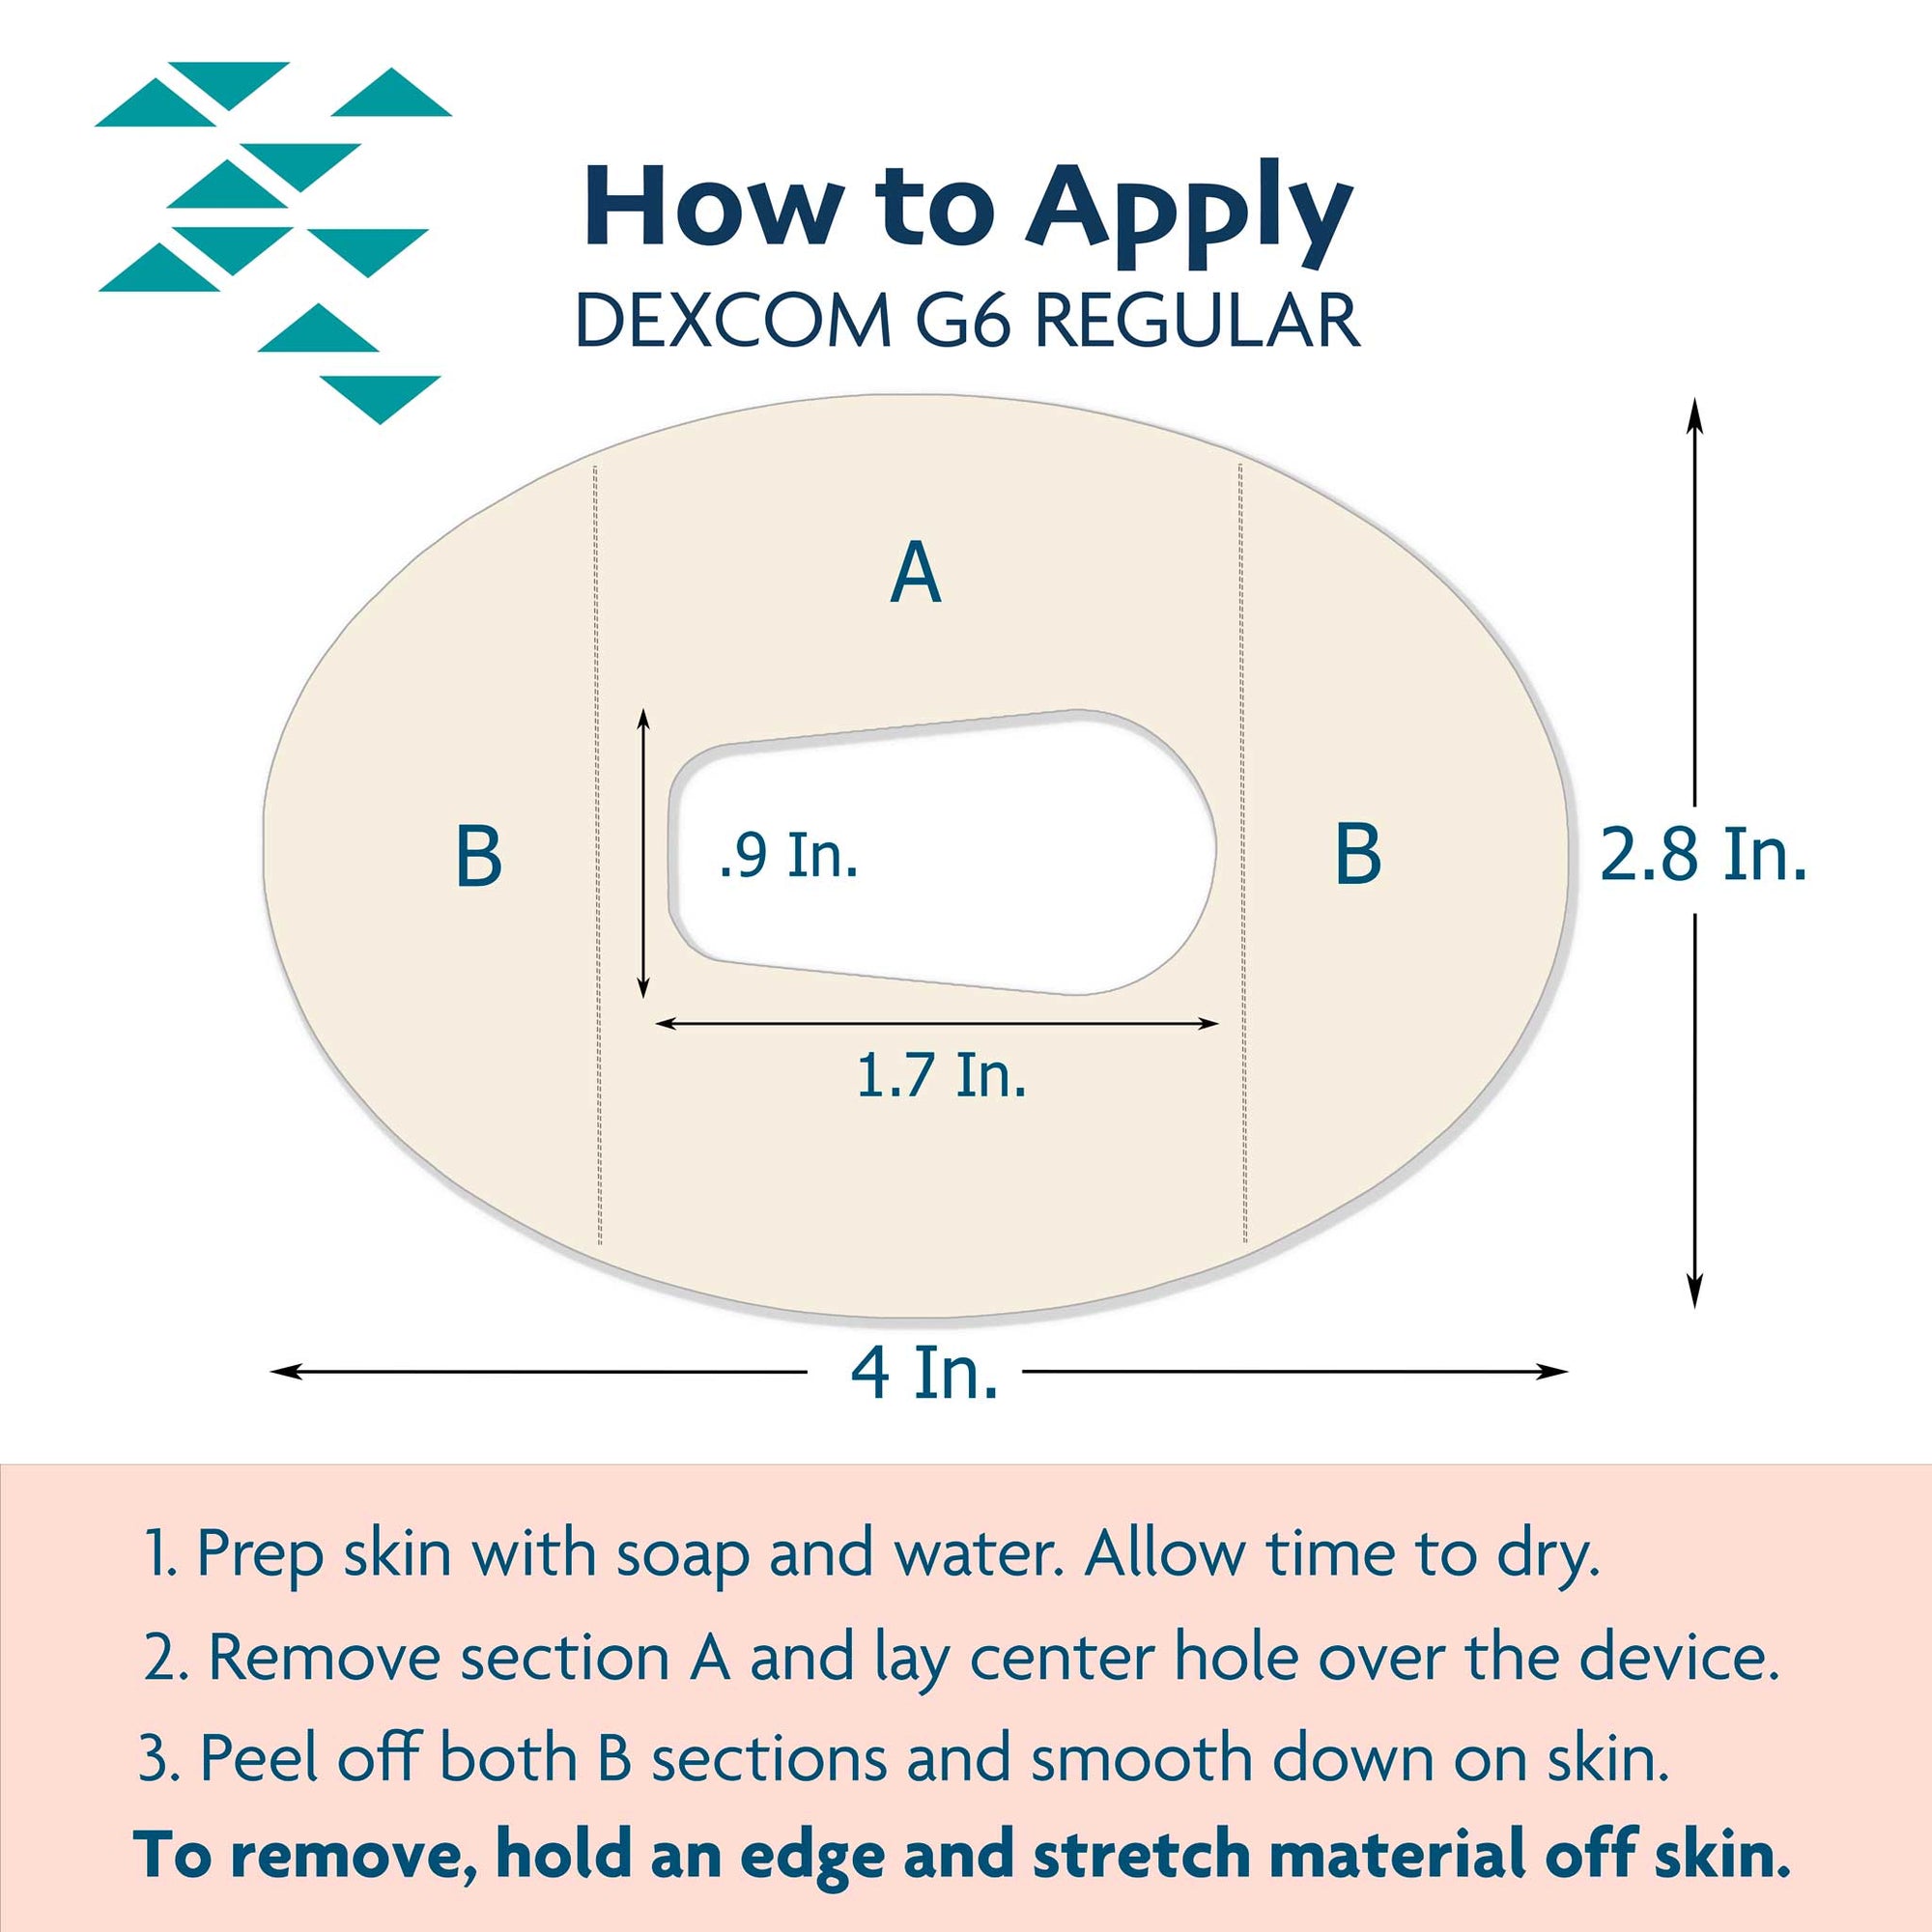 Guide for proper use of Dexcom G6 CGM patch